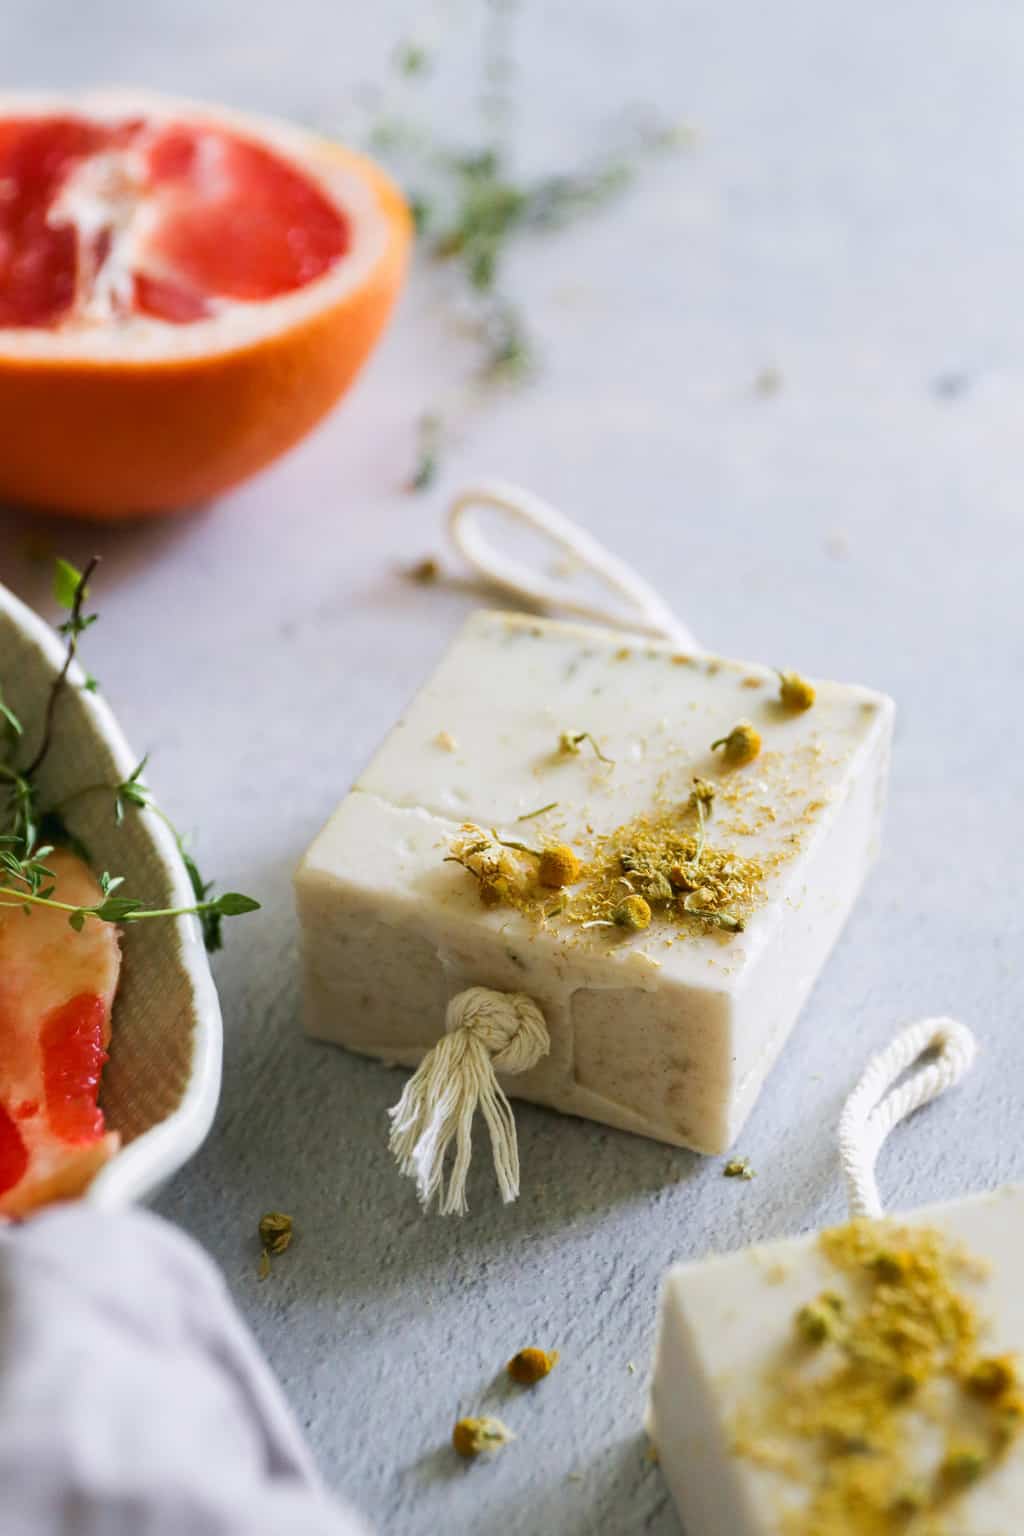 We'll show you how to make soap on a rope and share our recipe for nourishing thyme-grapefruit goat's milk soap. It makes a great gift!